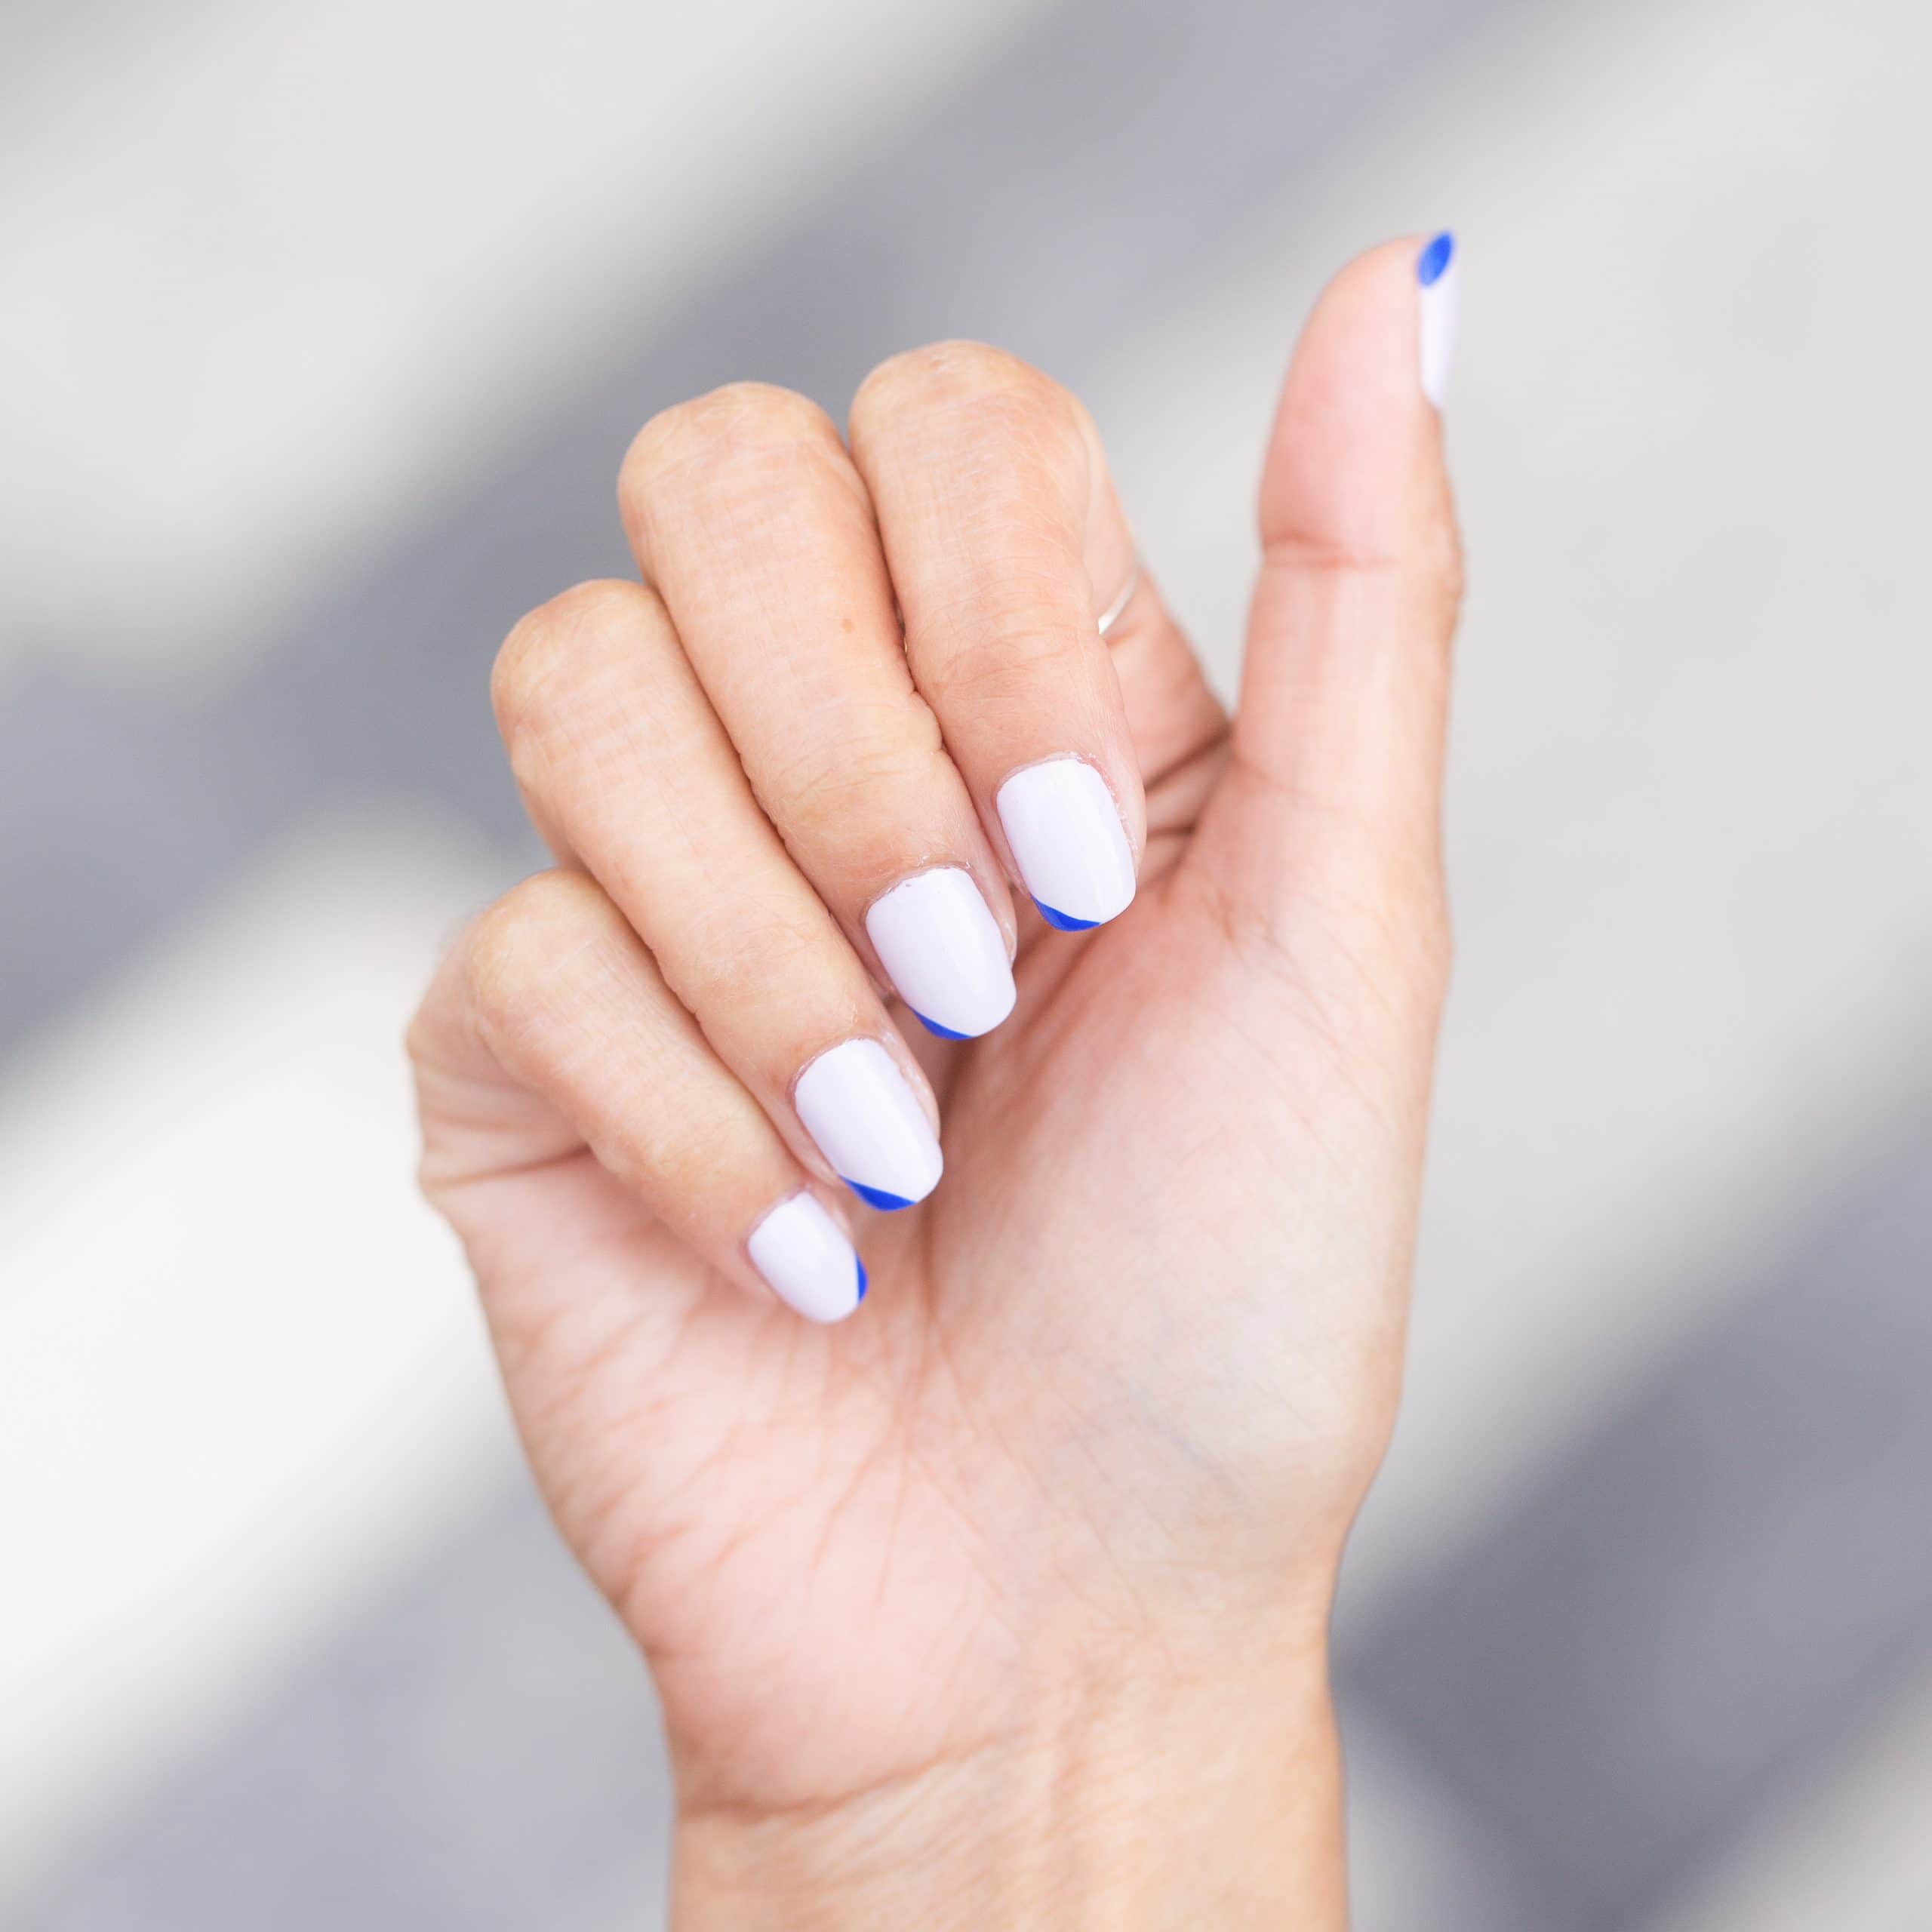 Pop Art Nails Are the Love-It-or-Hate-It Manicure Trend Popping Up for  Spring